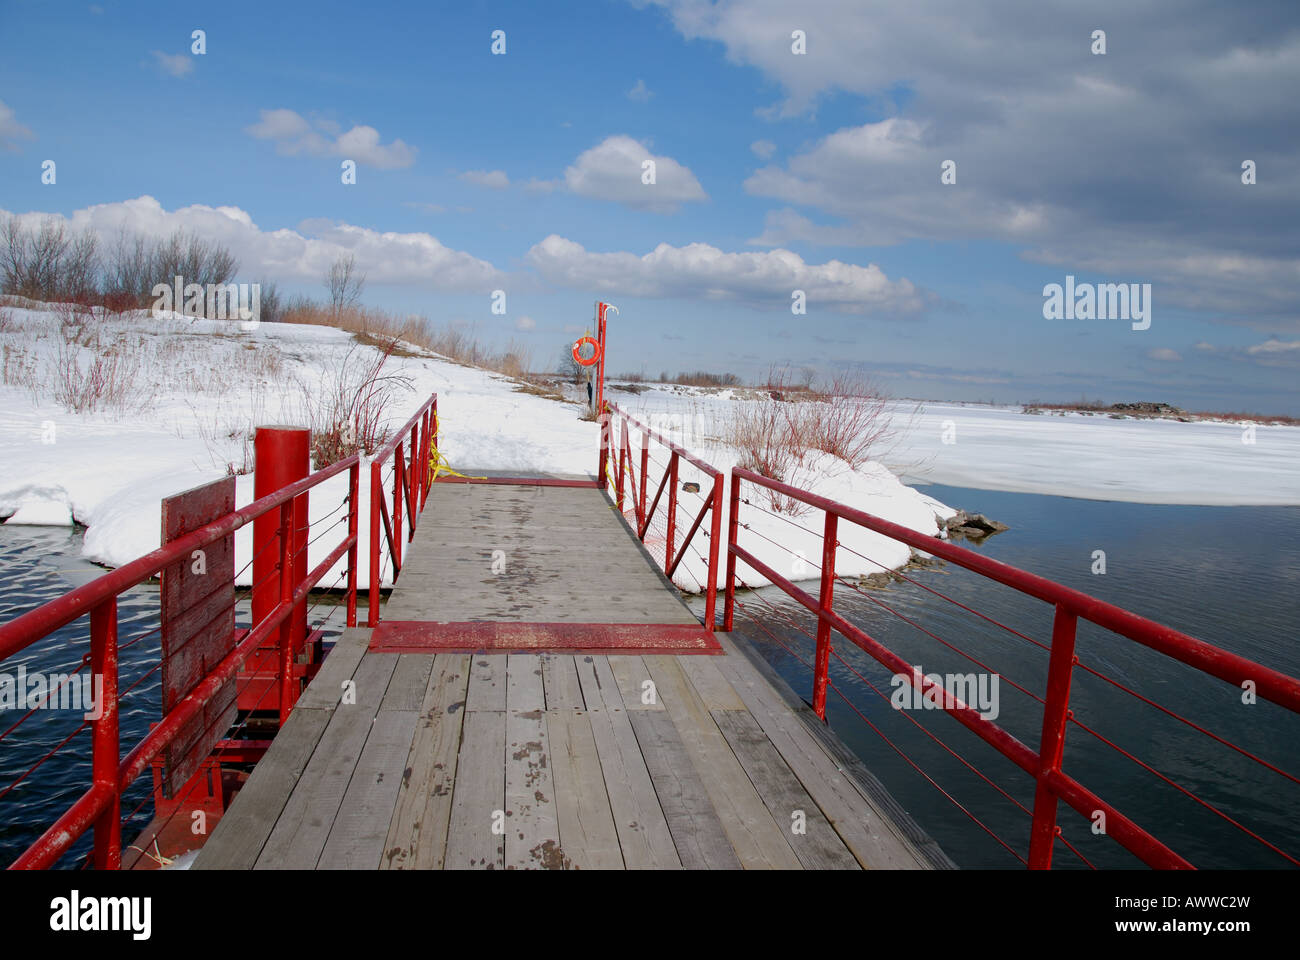 A red pedestrian bridge crossing a channel on the Leslie spit in Toronto. Stock Photo